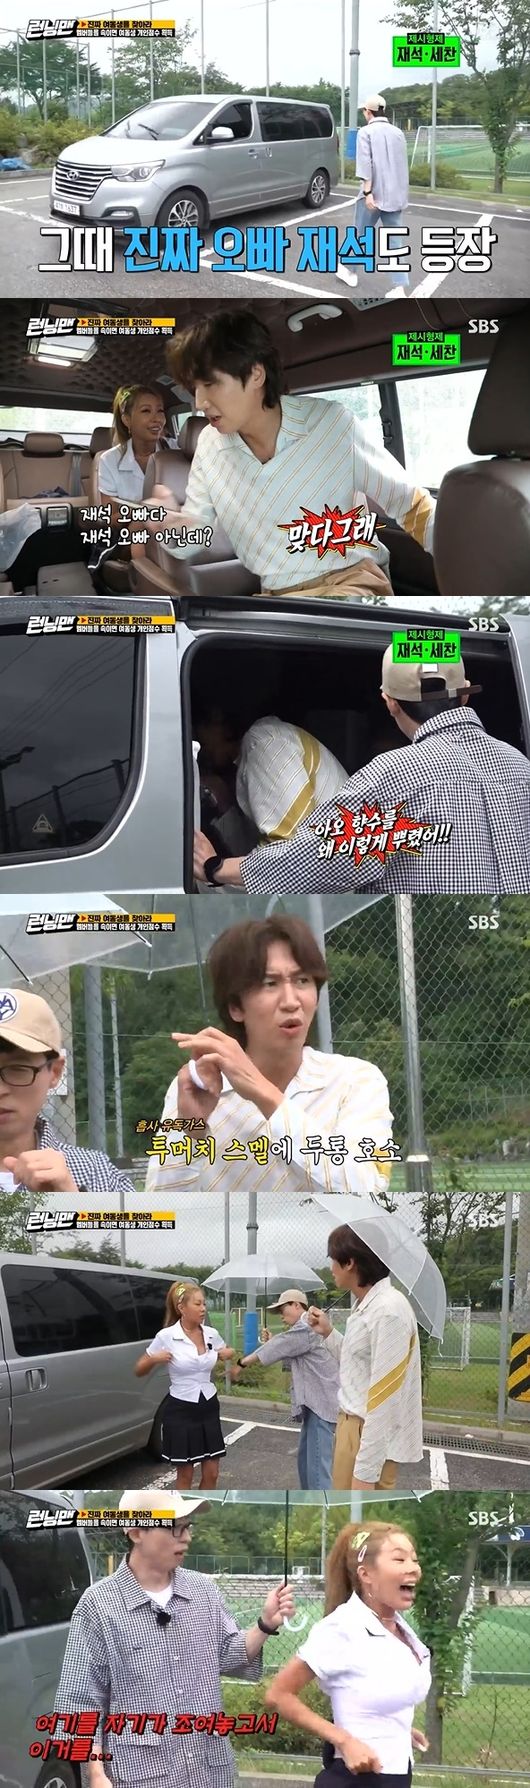 Running Man Yoo Jae-Suk complained of headaches as soon as he met JessieSBS Running Man, which was broadcasted on the afternoon of the afternoon, was decorated with Race, and Jessie, Jeon Sommy, Mama Musola and Lee Youngji appeared as guests.The members scattered and started shooting, and the production team said, Go to school to find my brother who has been playing a singer audition. The members can find their real sister and go to school.Two members and a sister guest are a team, and you can collect your academic scores and graduate. As soon as Yoo Jae-Suk spoke to Ho Hyun-joo on the phone, Hello Hyun-joo? Is Hyun-joo my relative? Are you Jessie?, and Jessie said, Come on, brother. My brother is my family. Come on, Tissus is so tight.First Lee Kwang-soo came to Jessie, and Jessie said, Brother, your uniform is so tight, come in quickly.Yoo Jae-Suk, who arrived after, said, Why did Hyunju sow Perfume?I appealed for a headache, and I laughed, saying, Do you say you are choking after your uniform? Jessie held the hands of Yoo Jae-Suk and Lee Kwang-soo and shouted We are brothers, while the real brothers were Yoo Jae-Suk and Yang Se-chan.Jessie gets personal score as she cheats on membersRunning Man screen captures